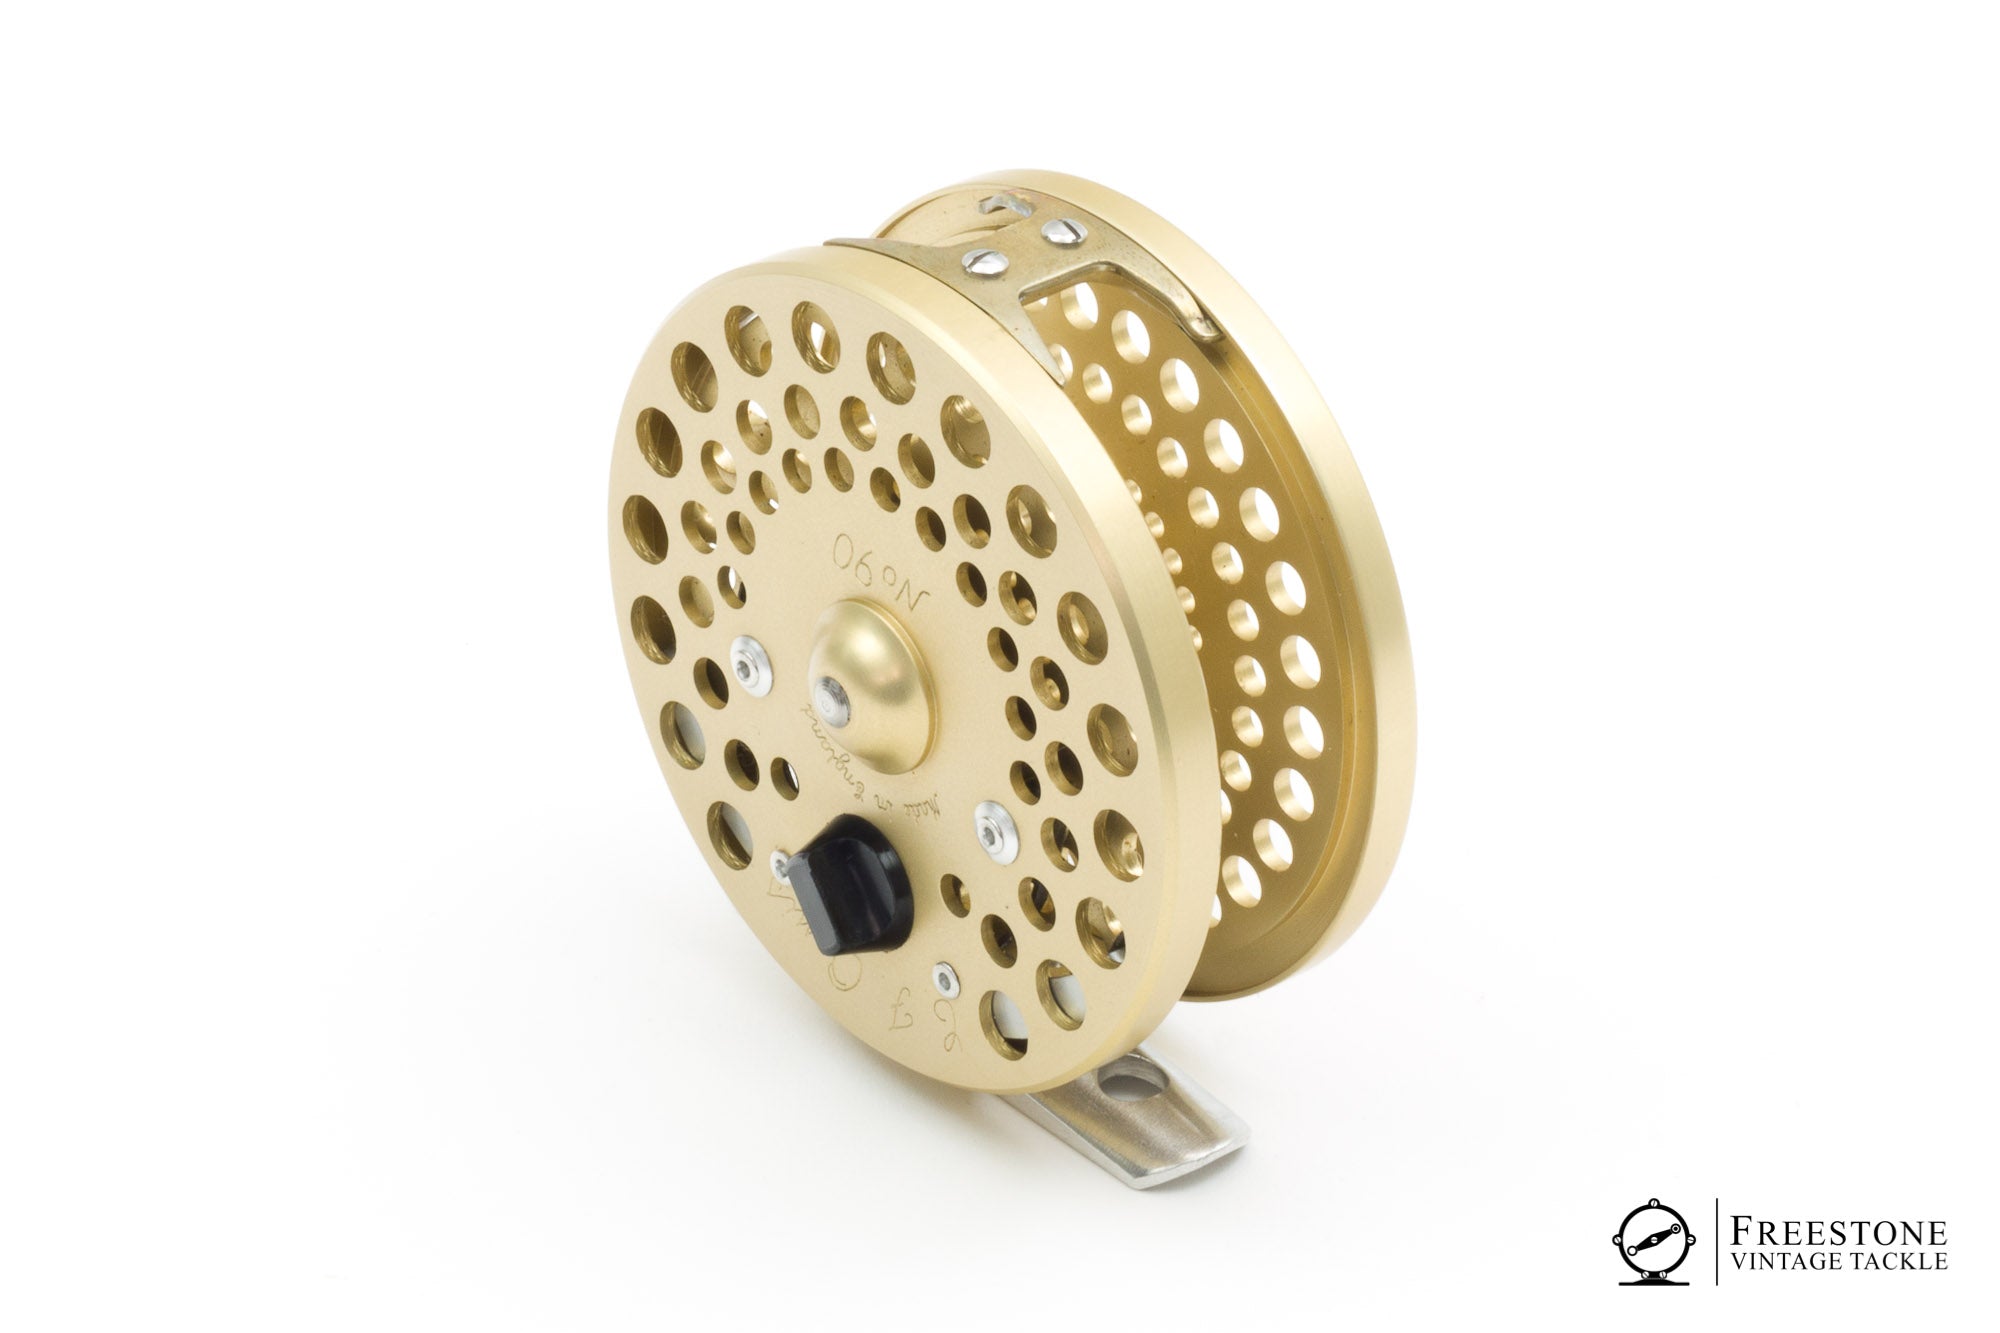 Orvis - CFO III Limited Edition Fly Reel - Gold - Freestone Vintage Tackle